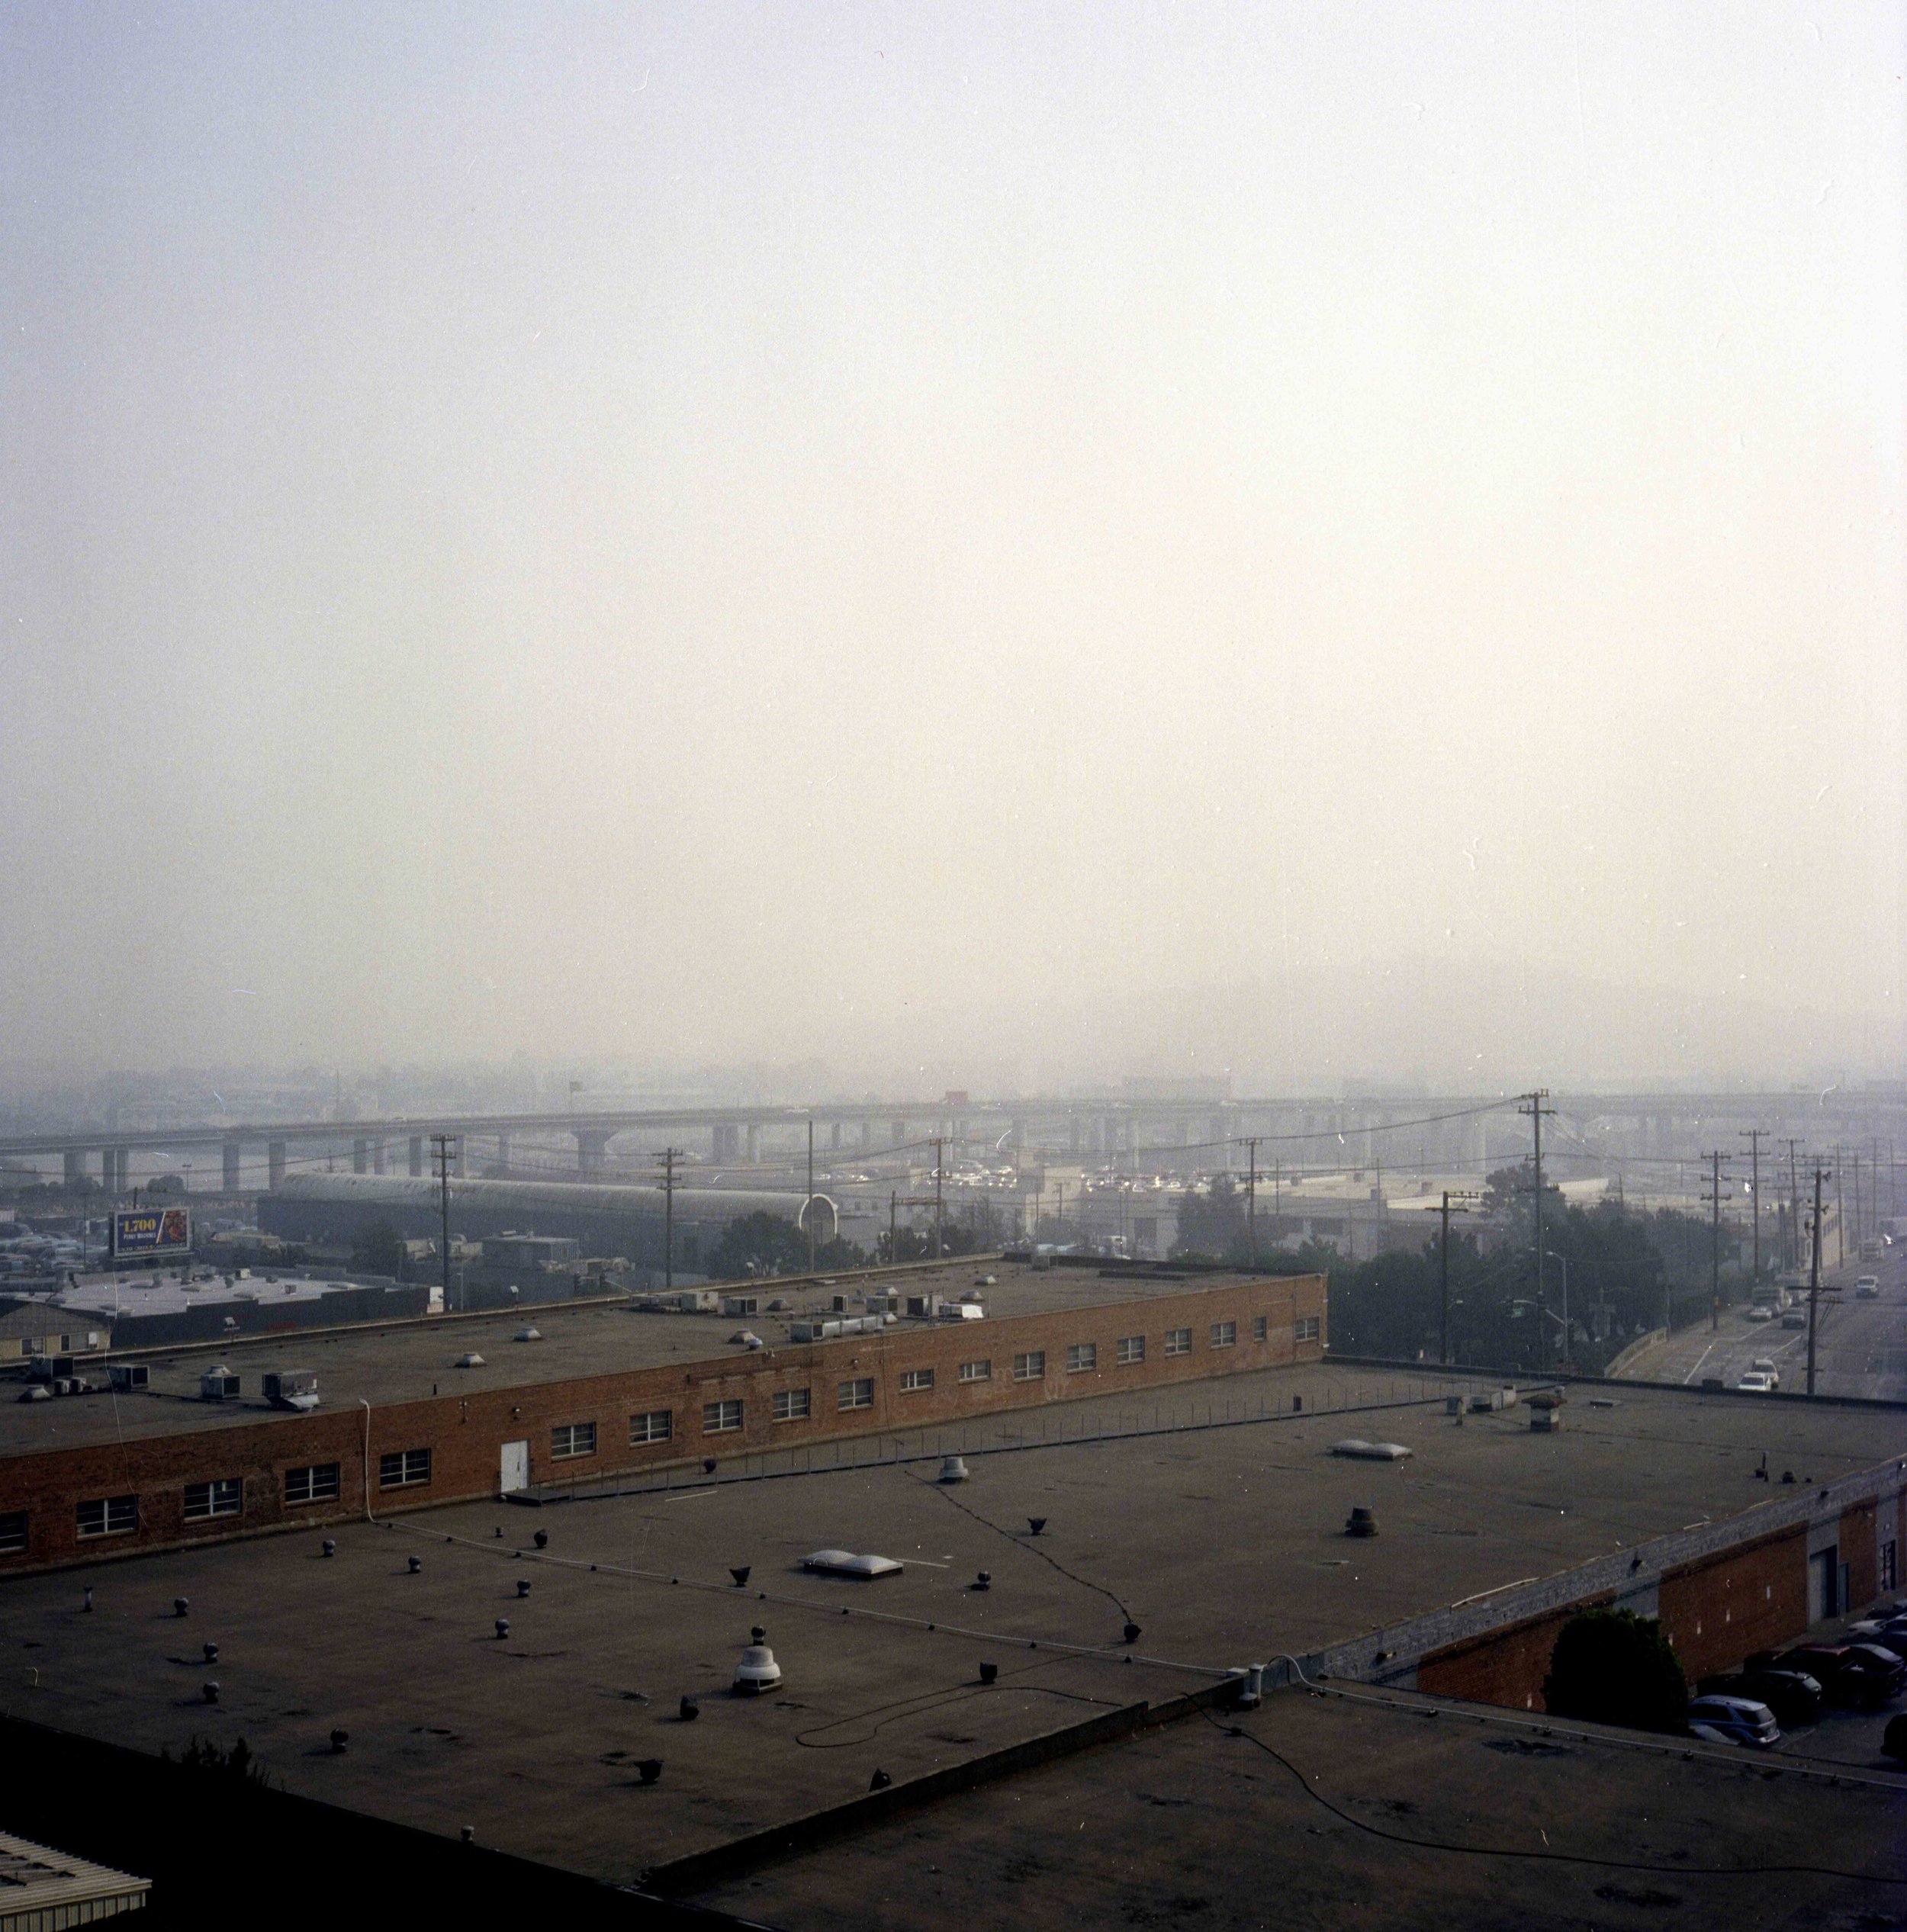 A Hazy View of Bayview-Hunters Point